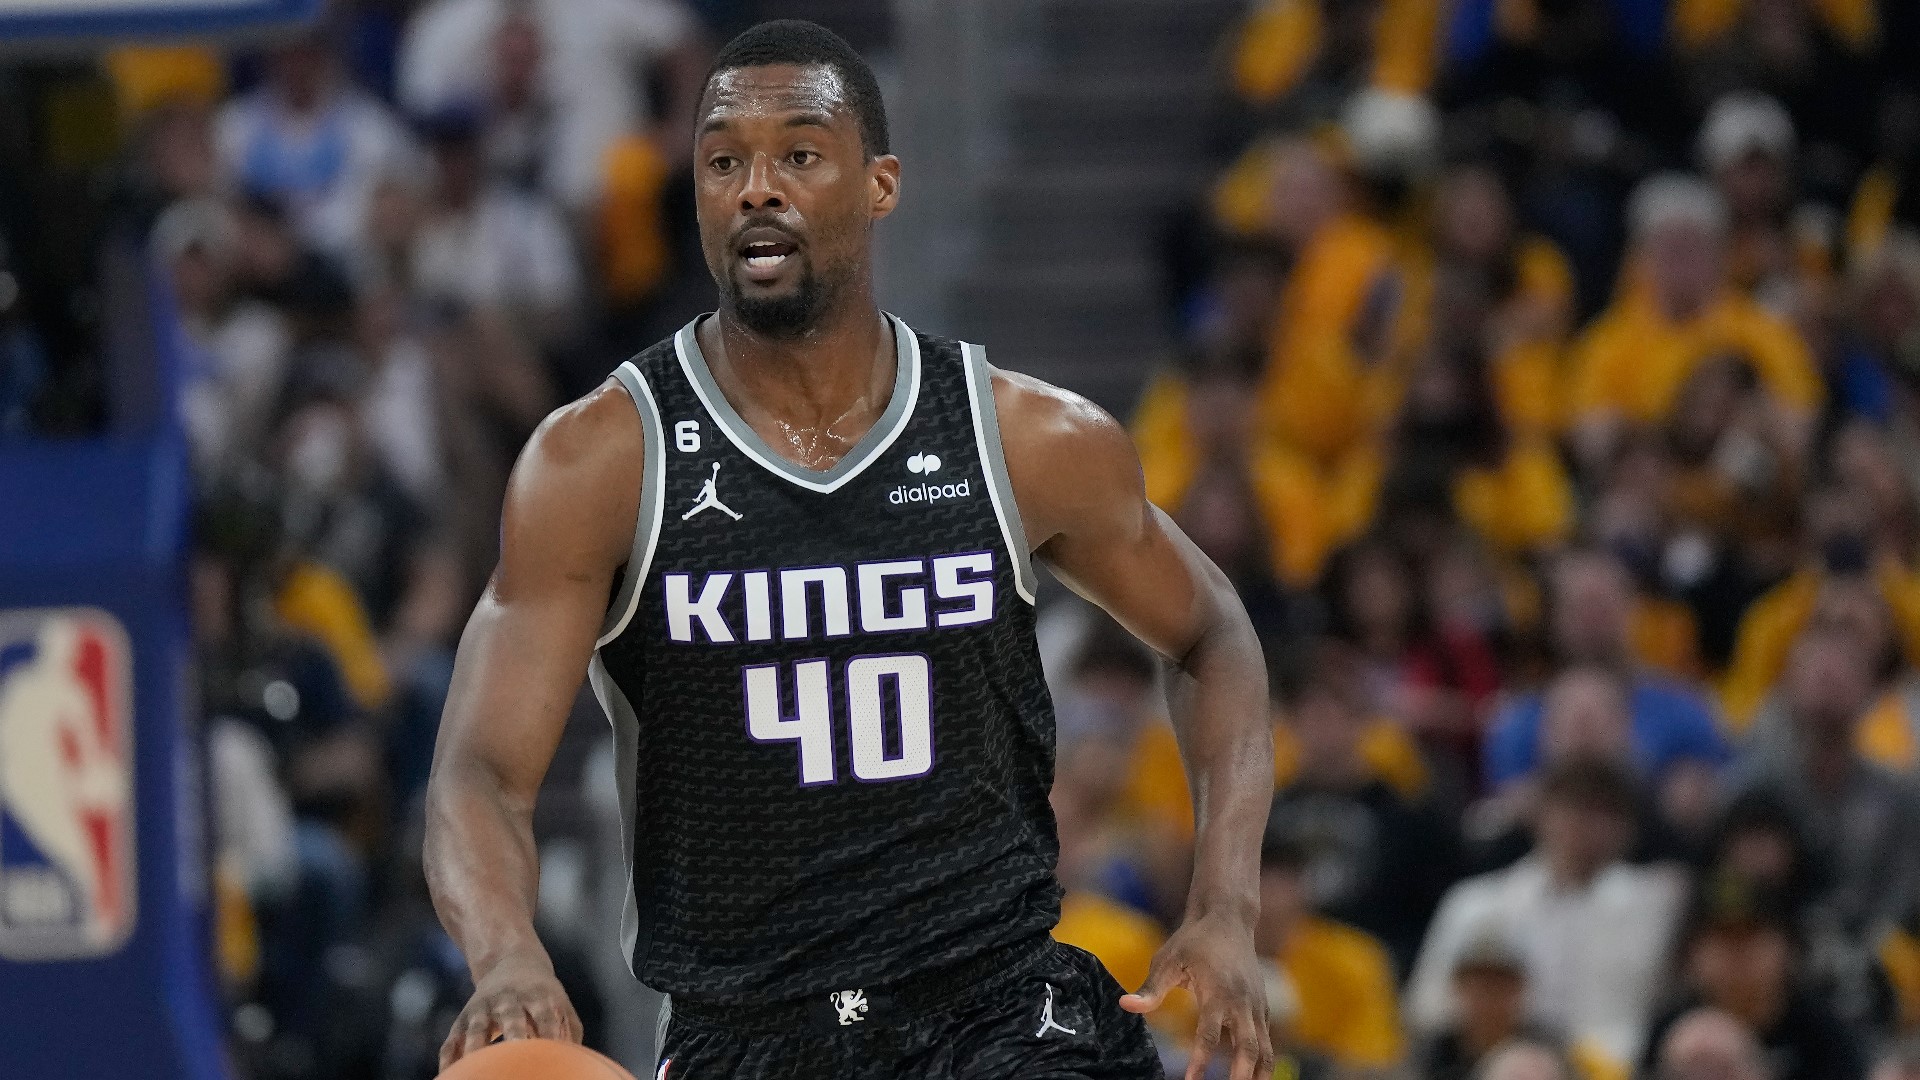 Harrison Barnes has reportedly signed a new contract extension with the Sacramento Kings, according to a person with knowledge of the negotiations.